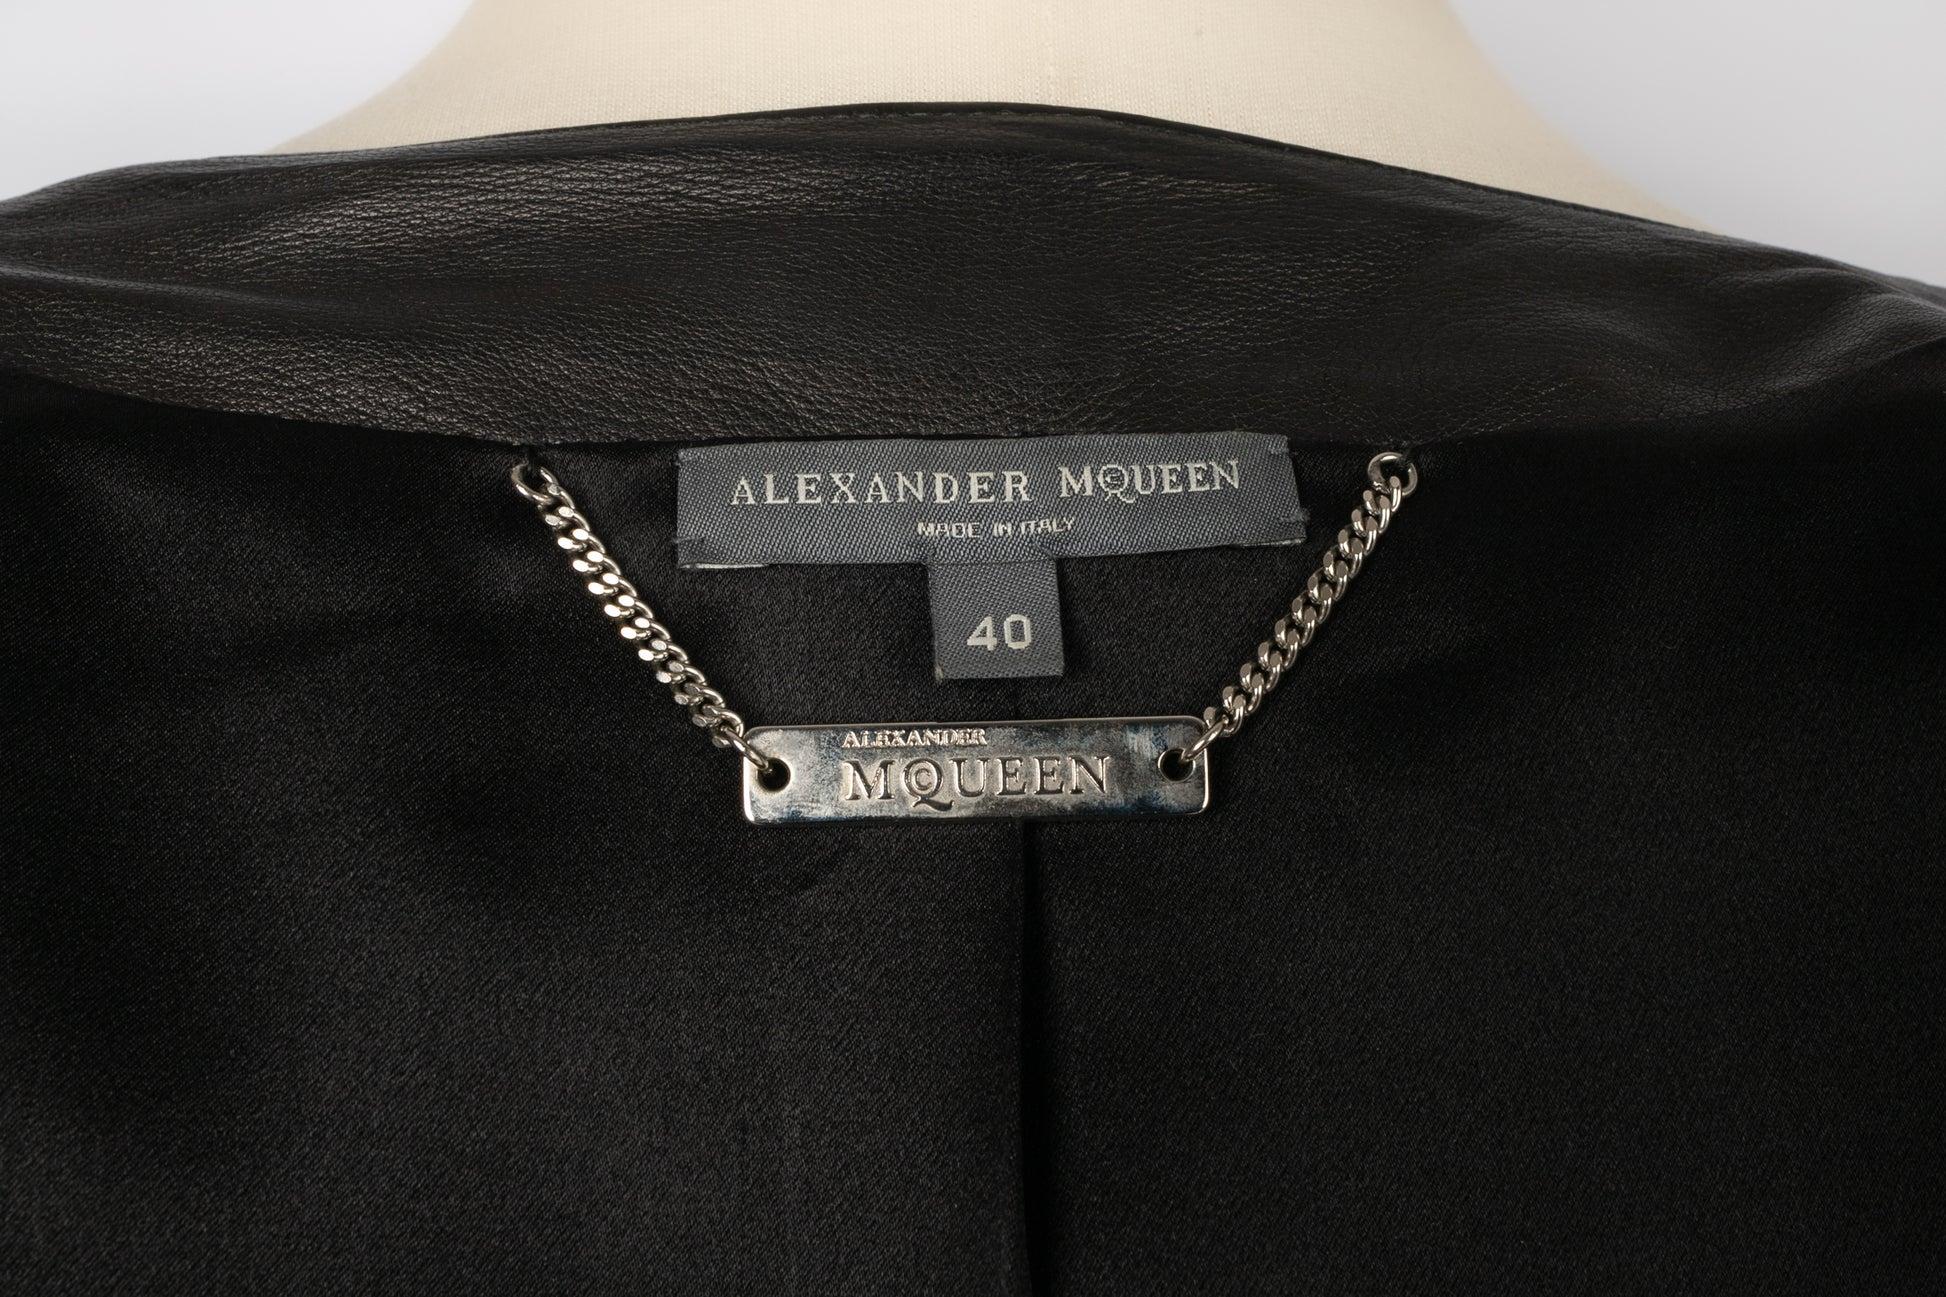 Alexander Mc Queen Black Leather Jacket with Silk Lining 2